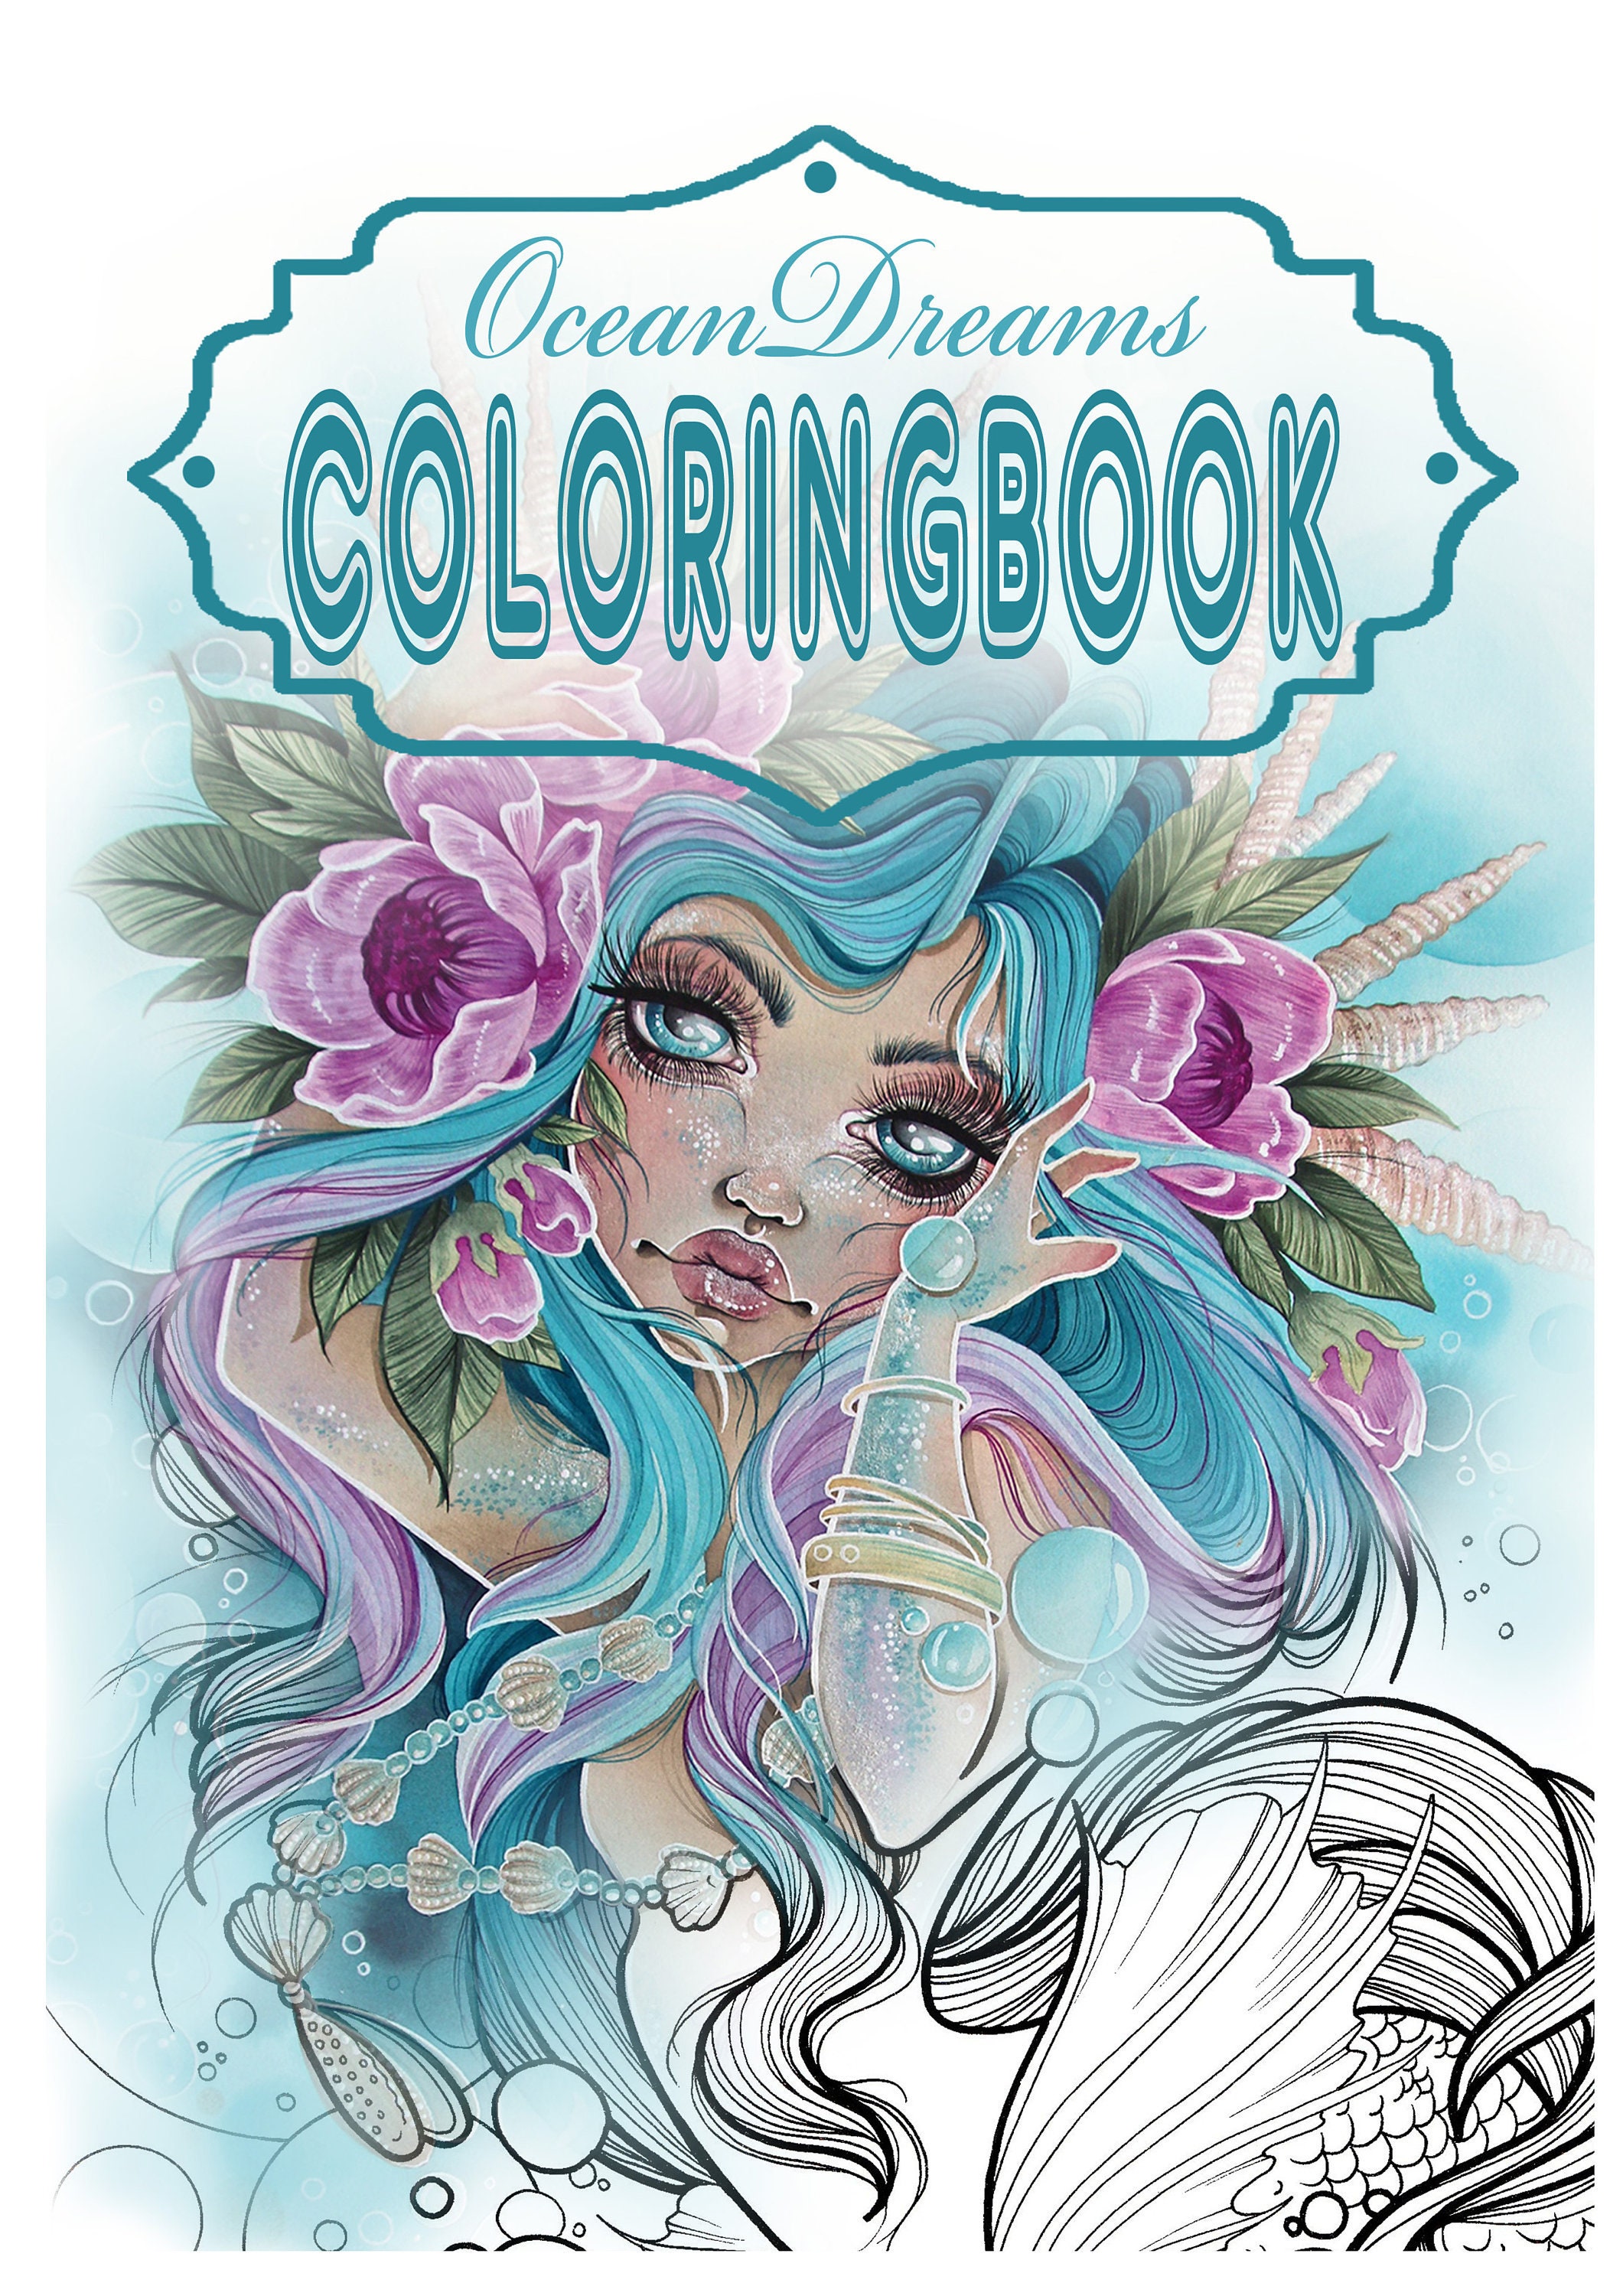 Color & Frame - By The Sea (adult Coloring Book) - By New Seasons